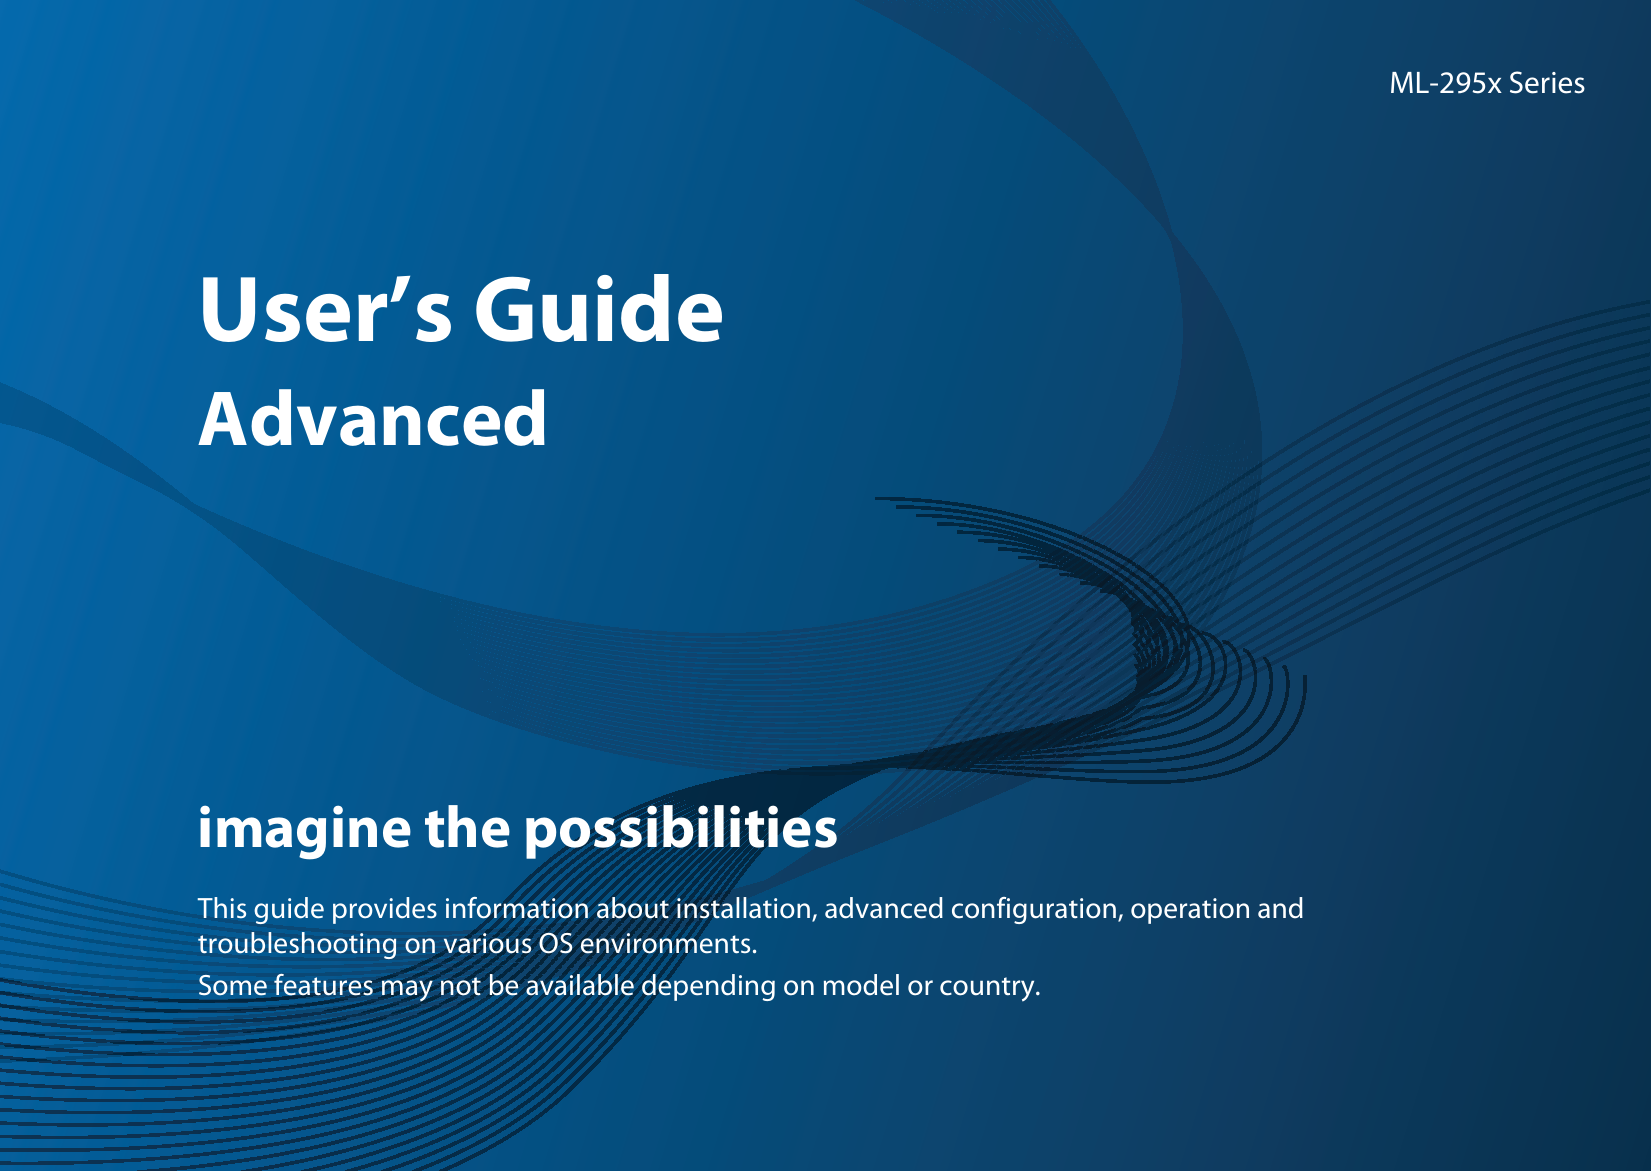 ML-295x SeriesUser’s GuideAdvancedimagine the possibilitiesThis guide provides information about installation, advanced configuration, operation and troubleshooting on various OS environments.Some features may not be available depending on model or country.